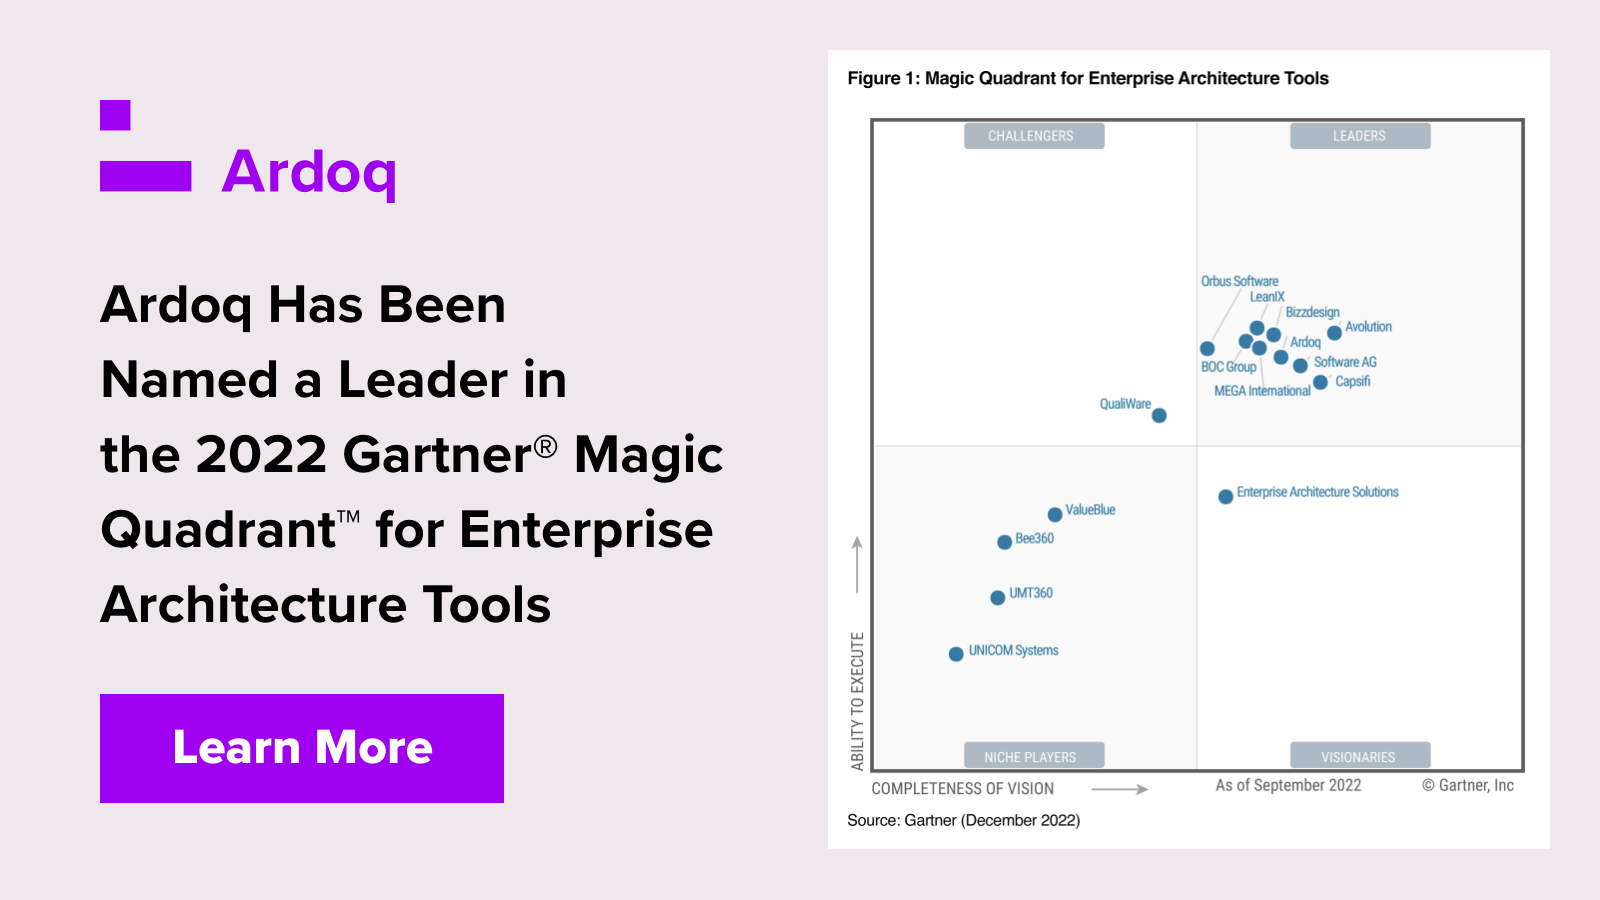 Ardoq Named a Leader in the Gartner® Magic Quadrant™ for Enterprise Architecture Tools for the Second Year Running